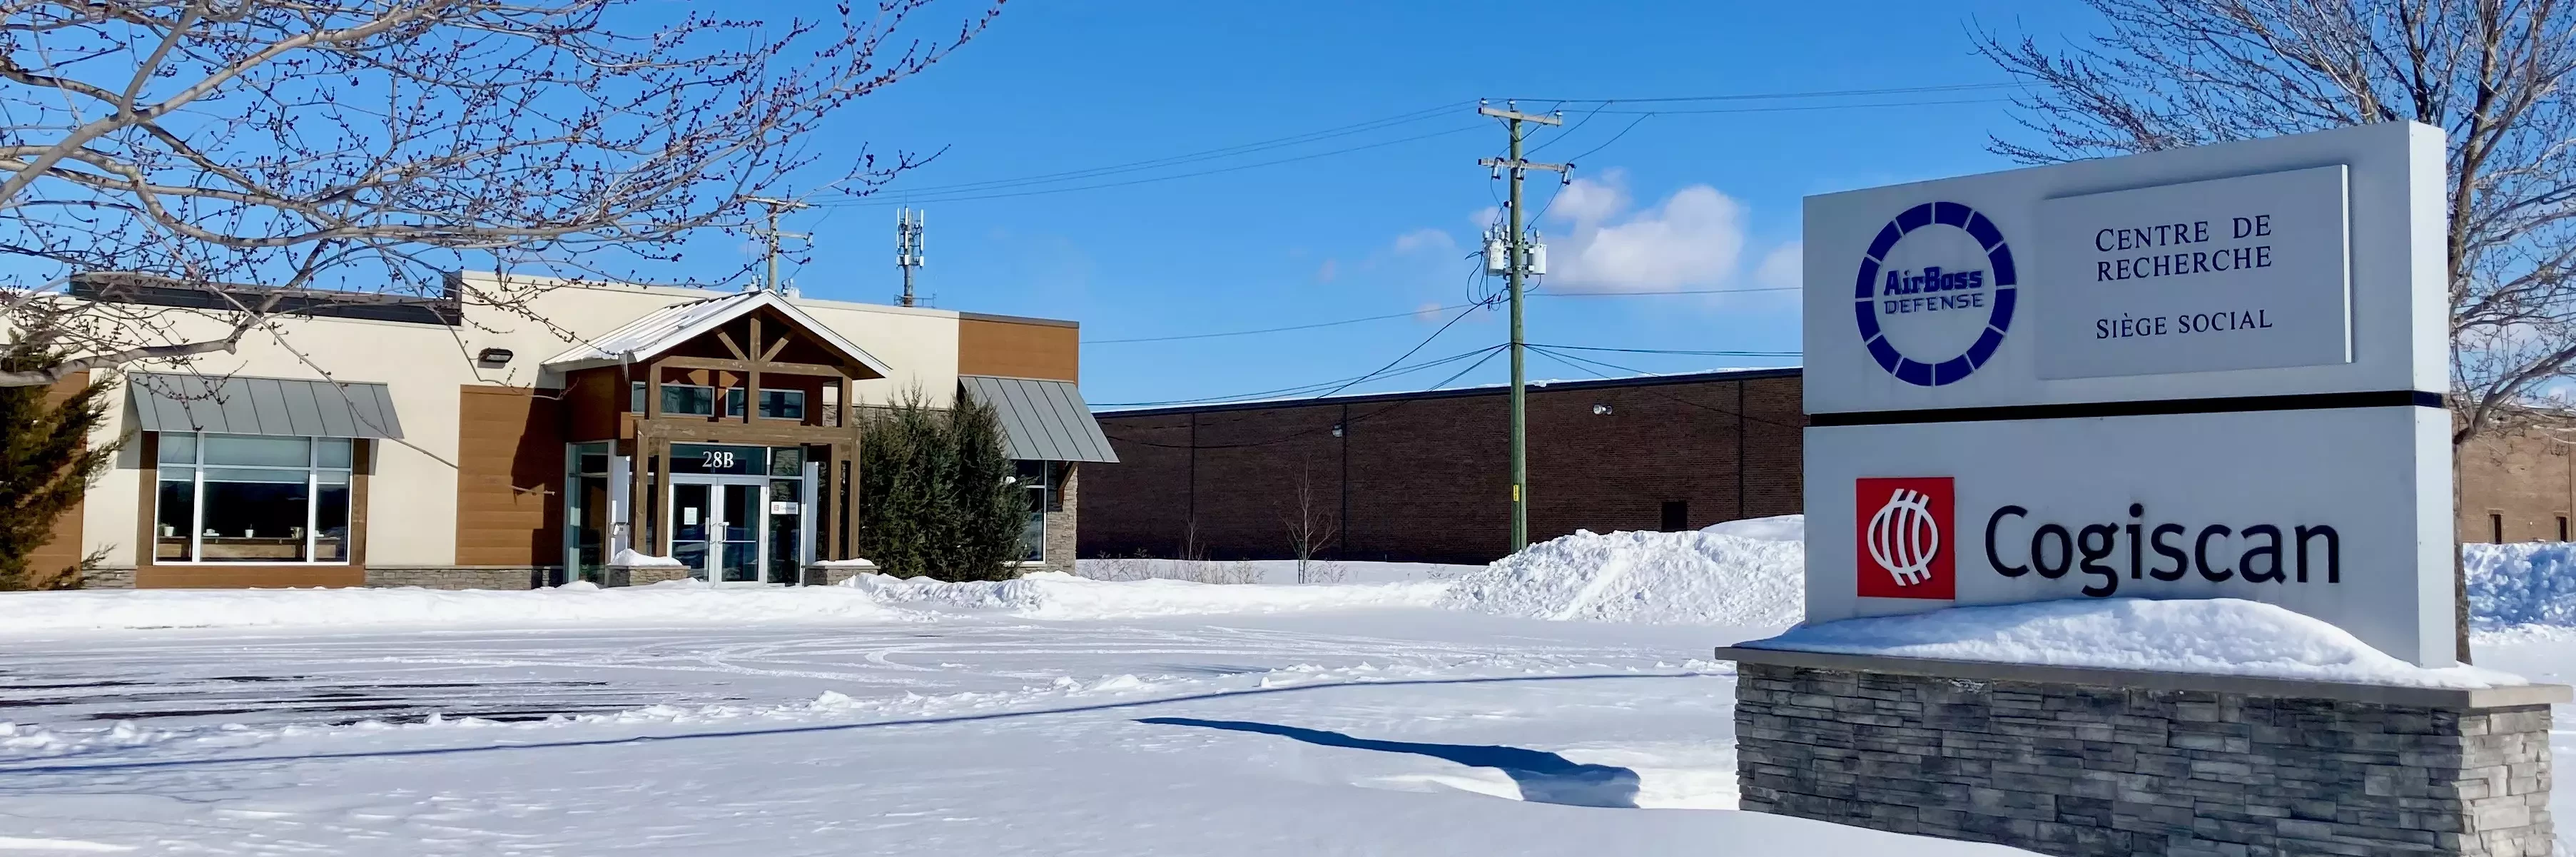 Cogiscan location in Canada covered with snow